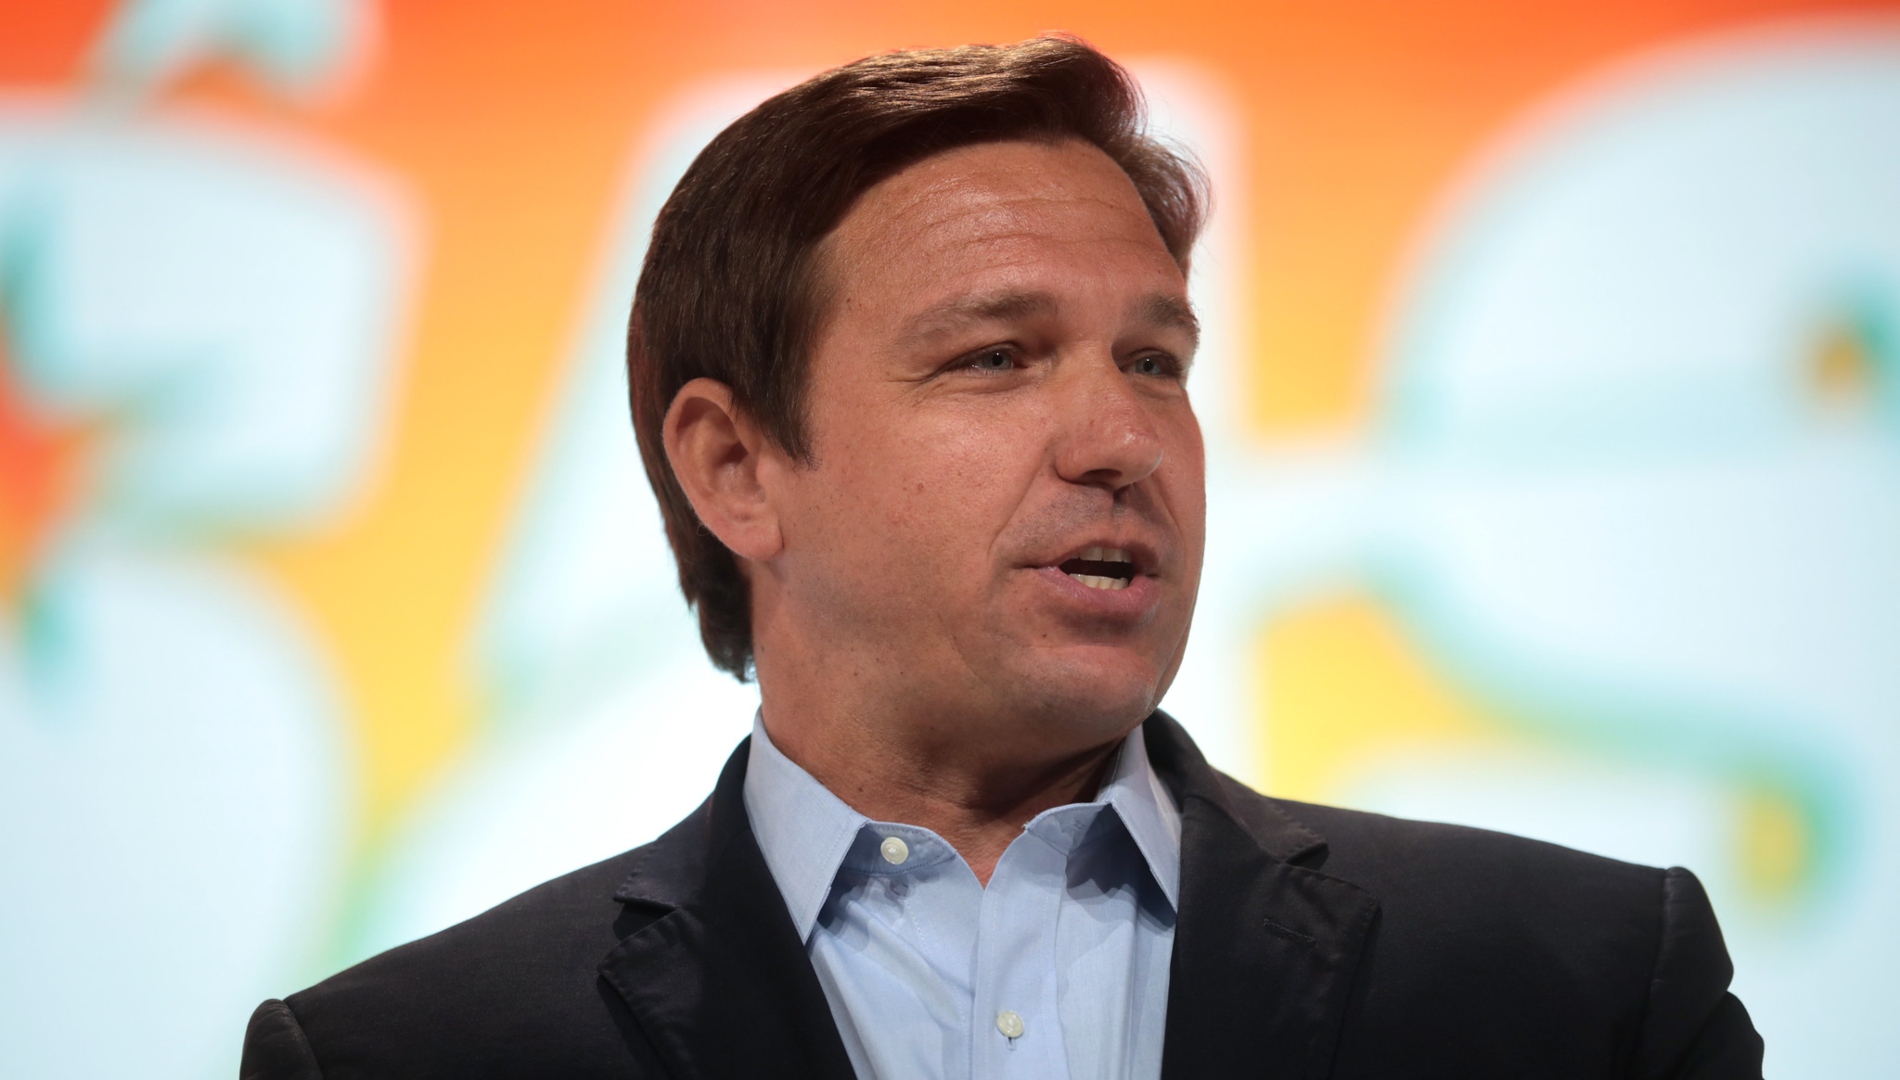 Image: Ron DeSantis to introduce legislation in Florida prohibiting the use of CBDCs in the state